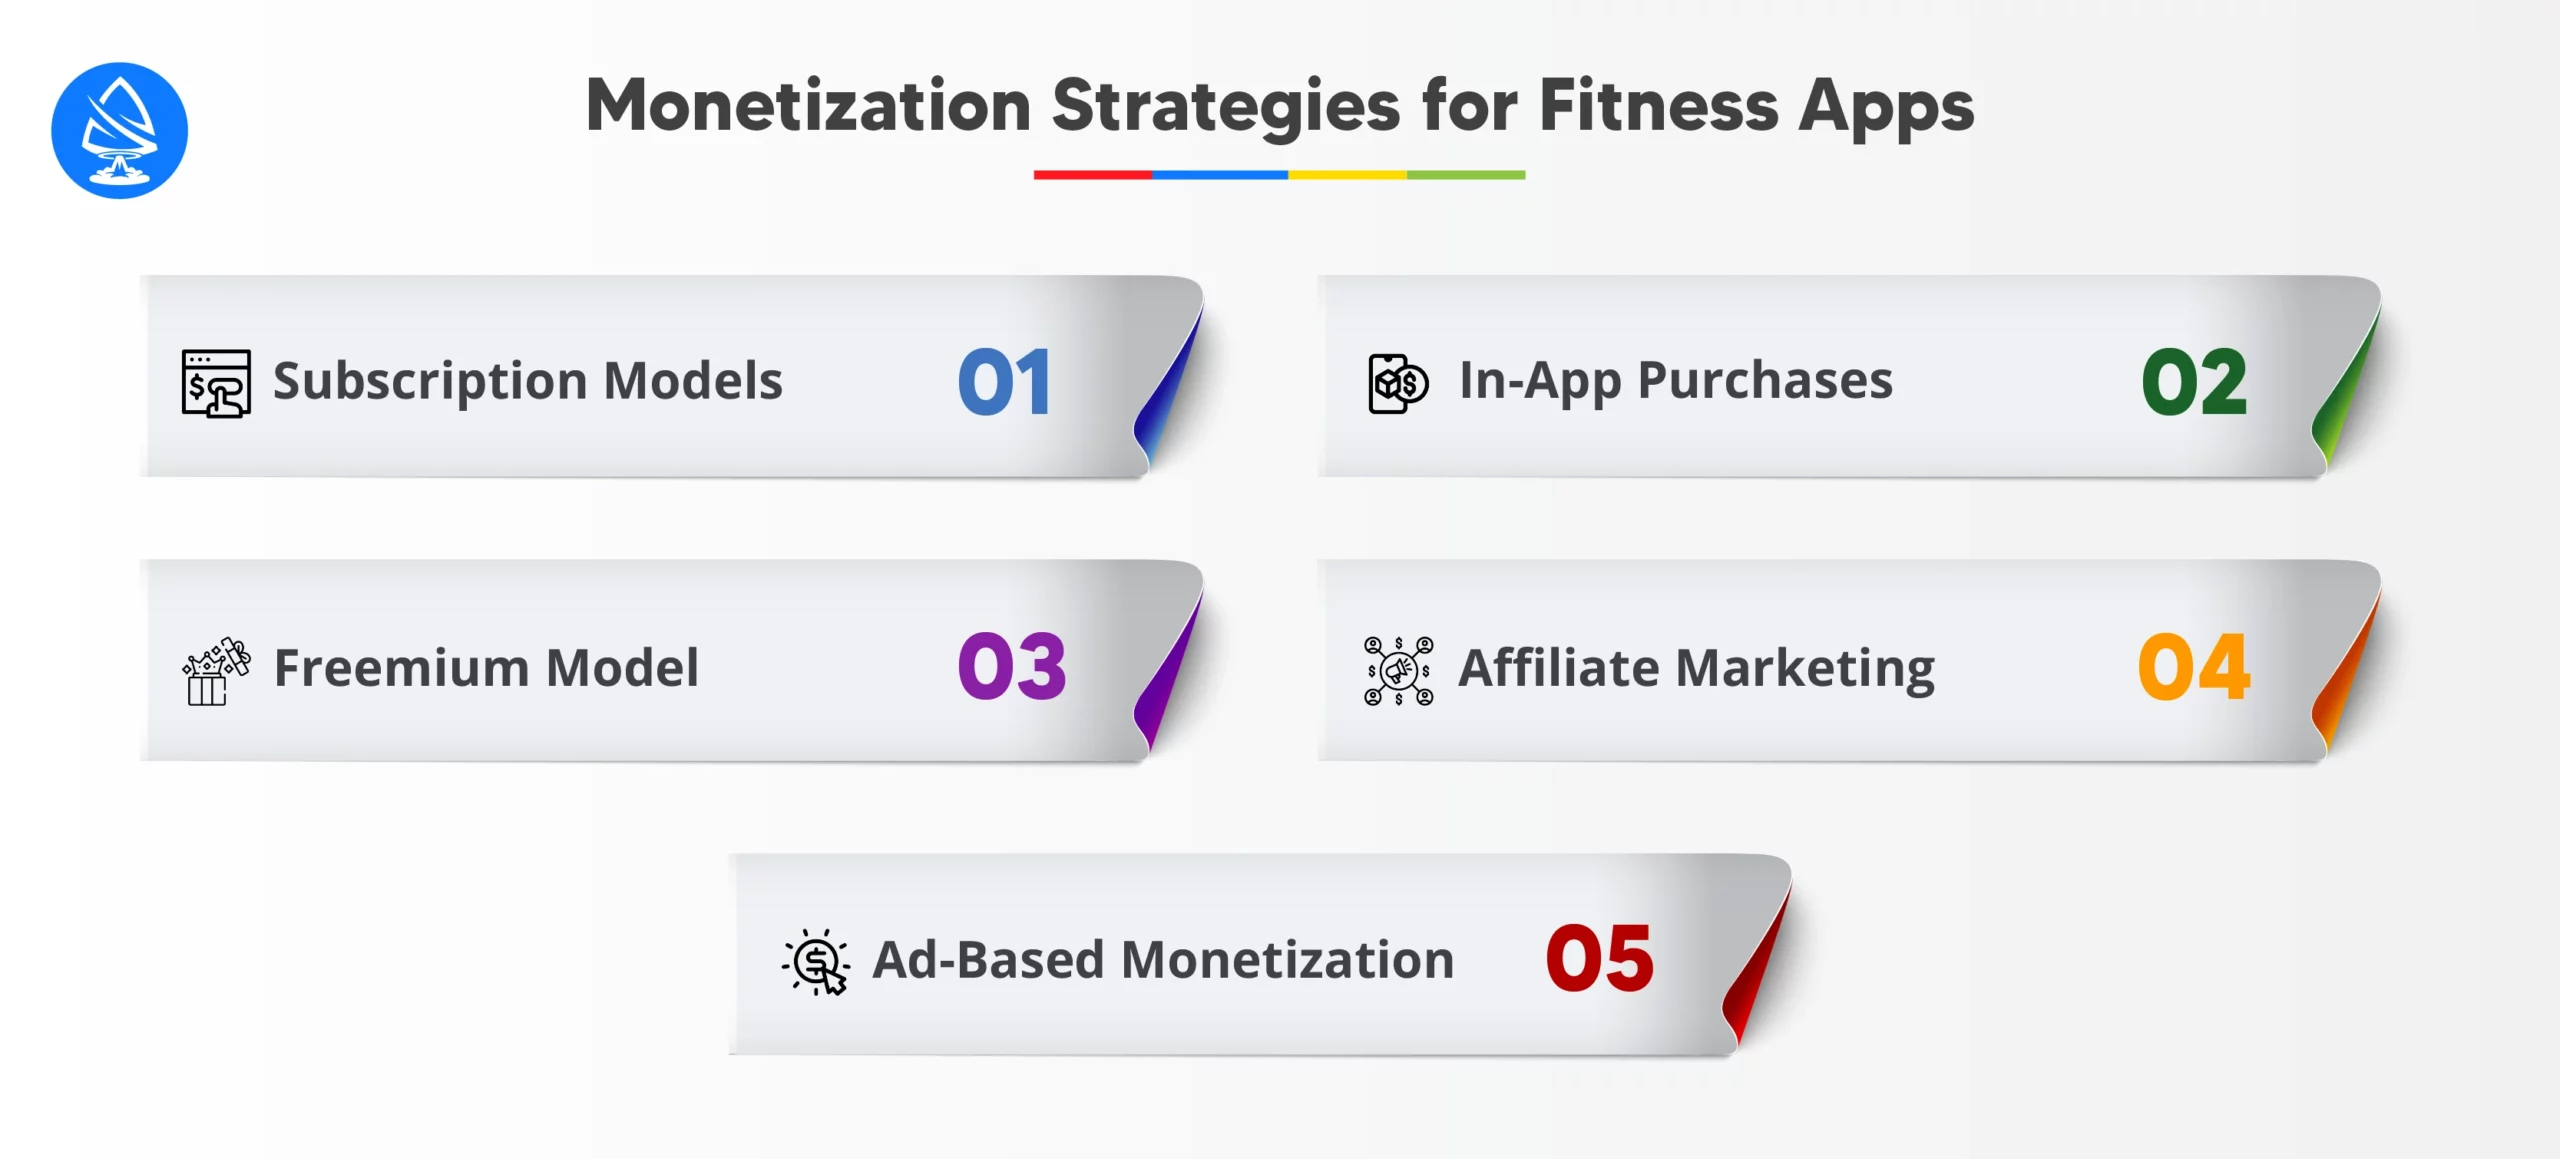 Monetization Strategies for Fitness Apps